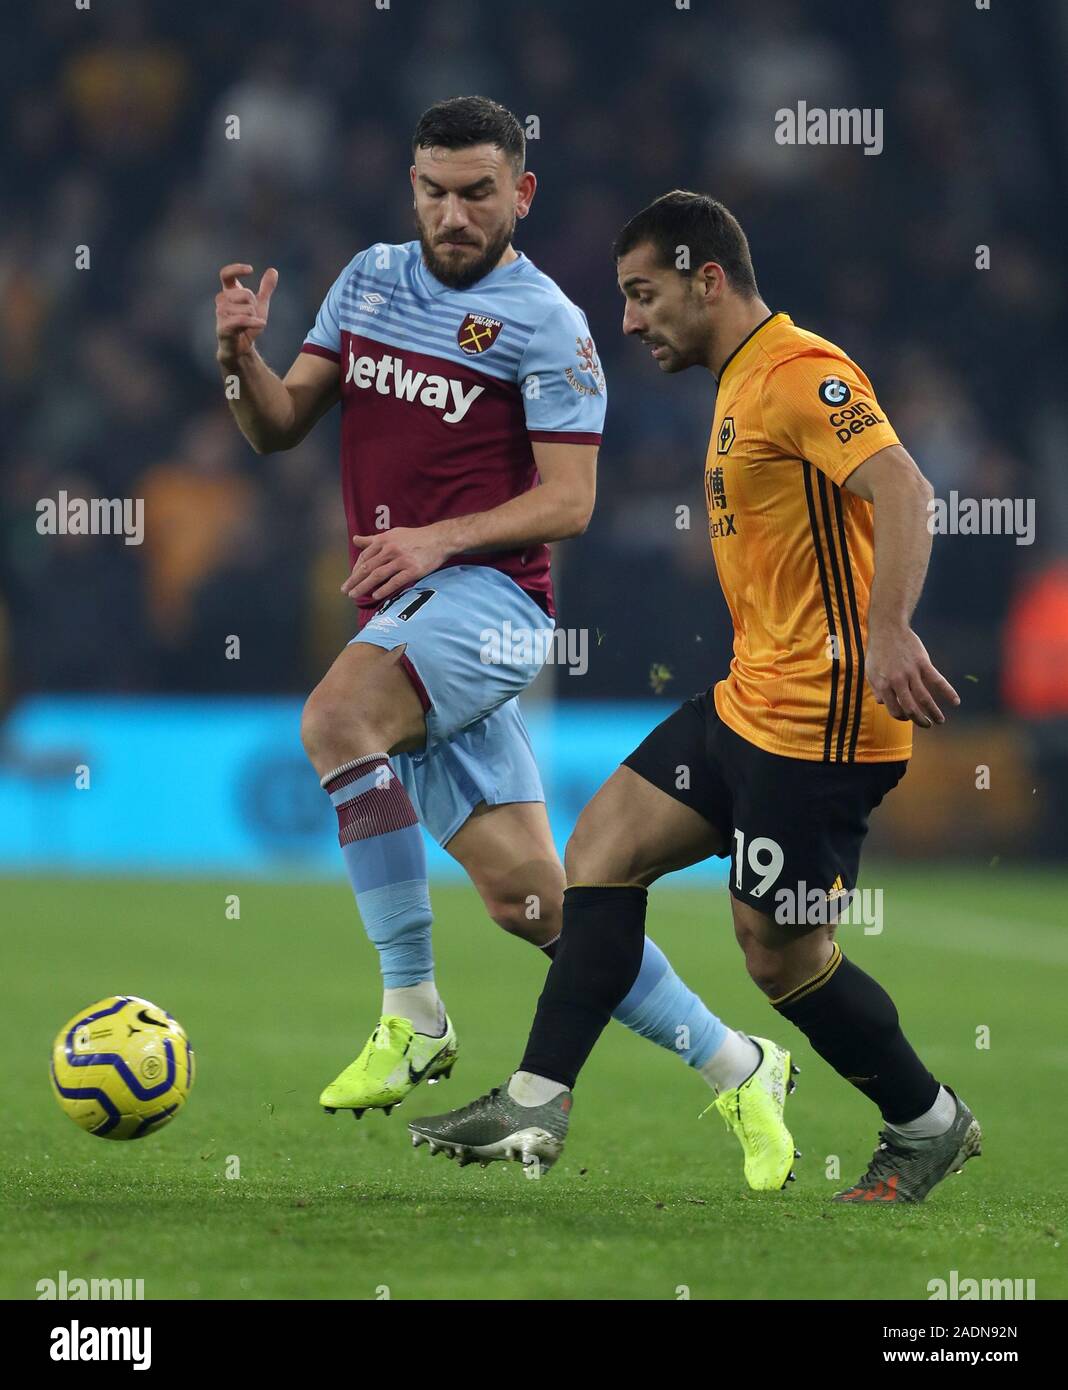 West Ham United's Robert Snodgrass (left) and Wolverhampton Wanderers's Jonny battle for the ball during the Premier League match at Molineux, Wolverhampton. Stock Photo